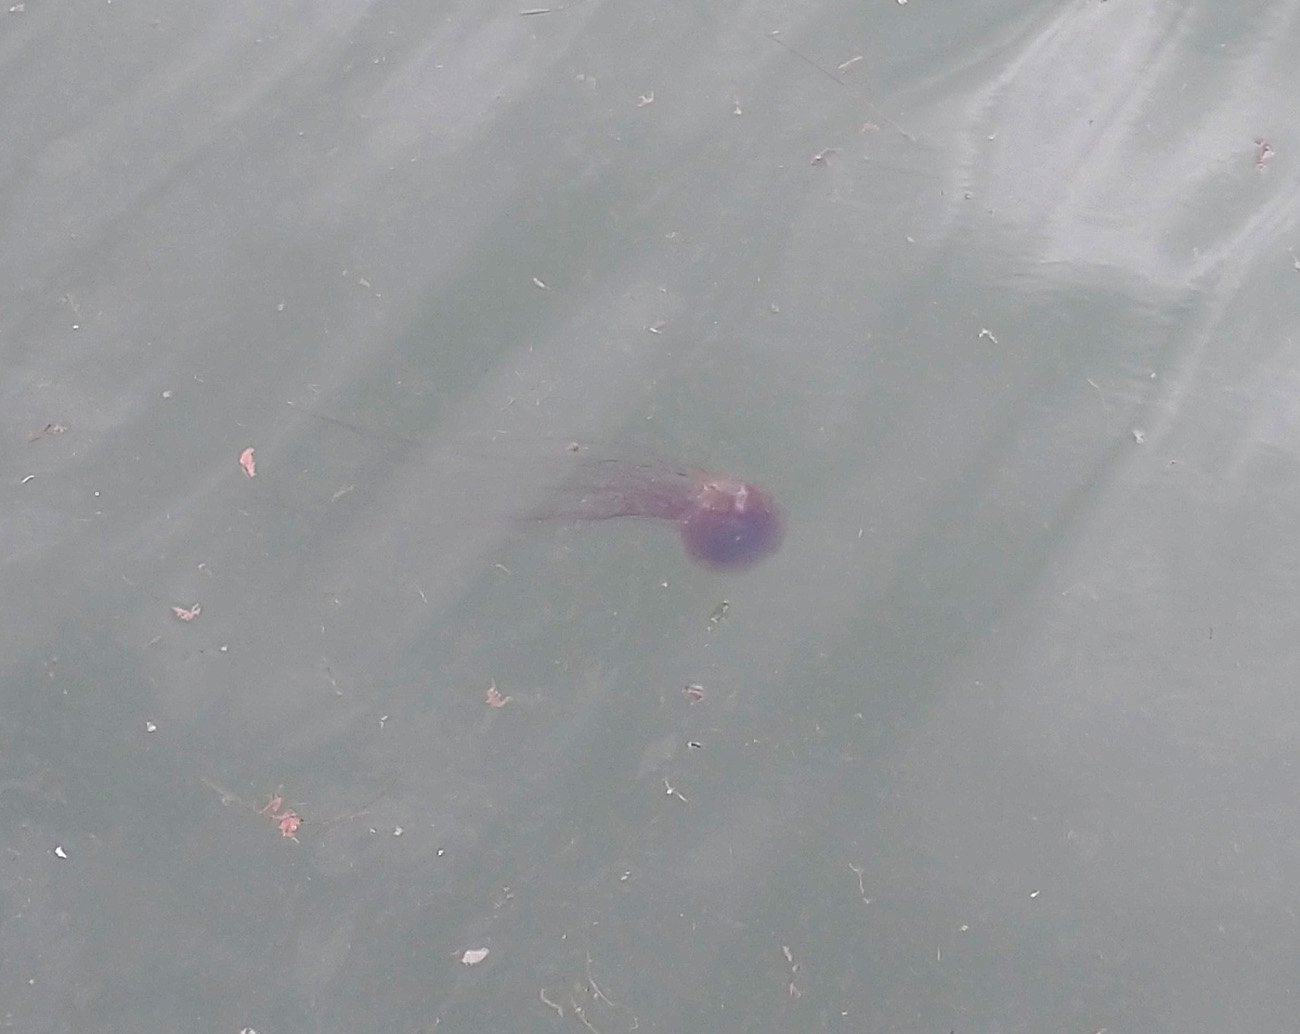 Harbor has these gross brown jellyfishes floating around.  We don't need to throw trash in the ocean, it makes its own.